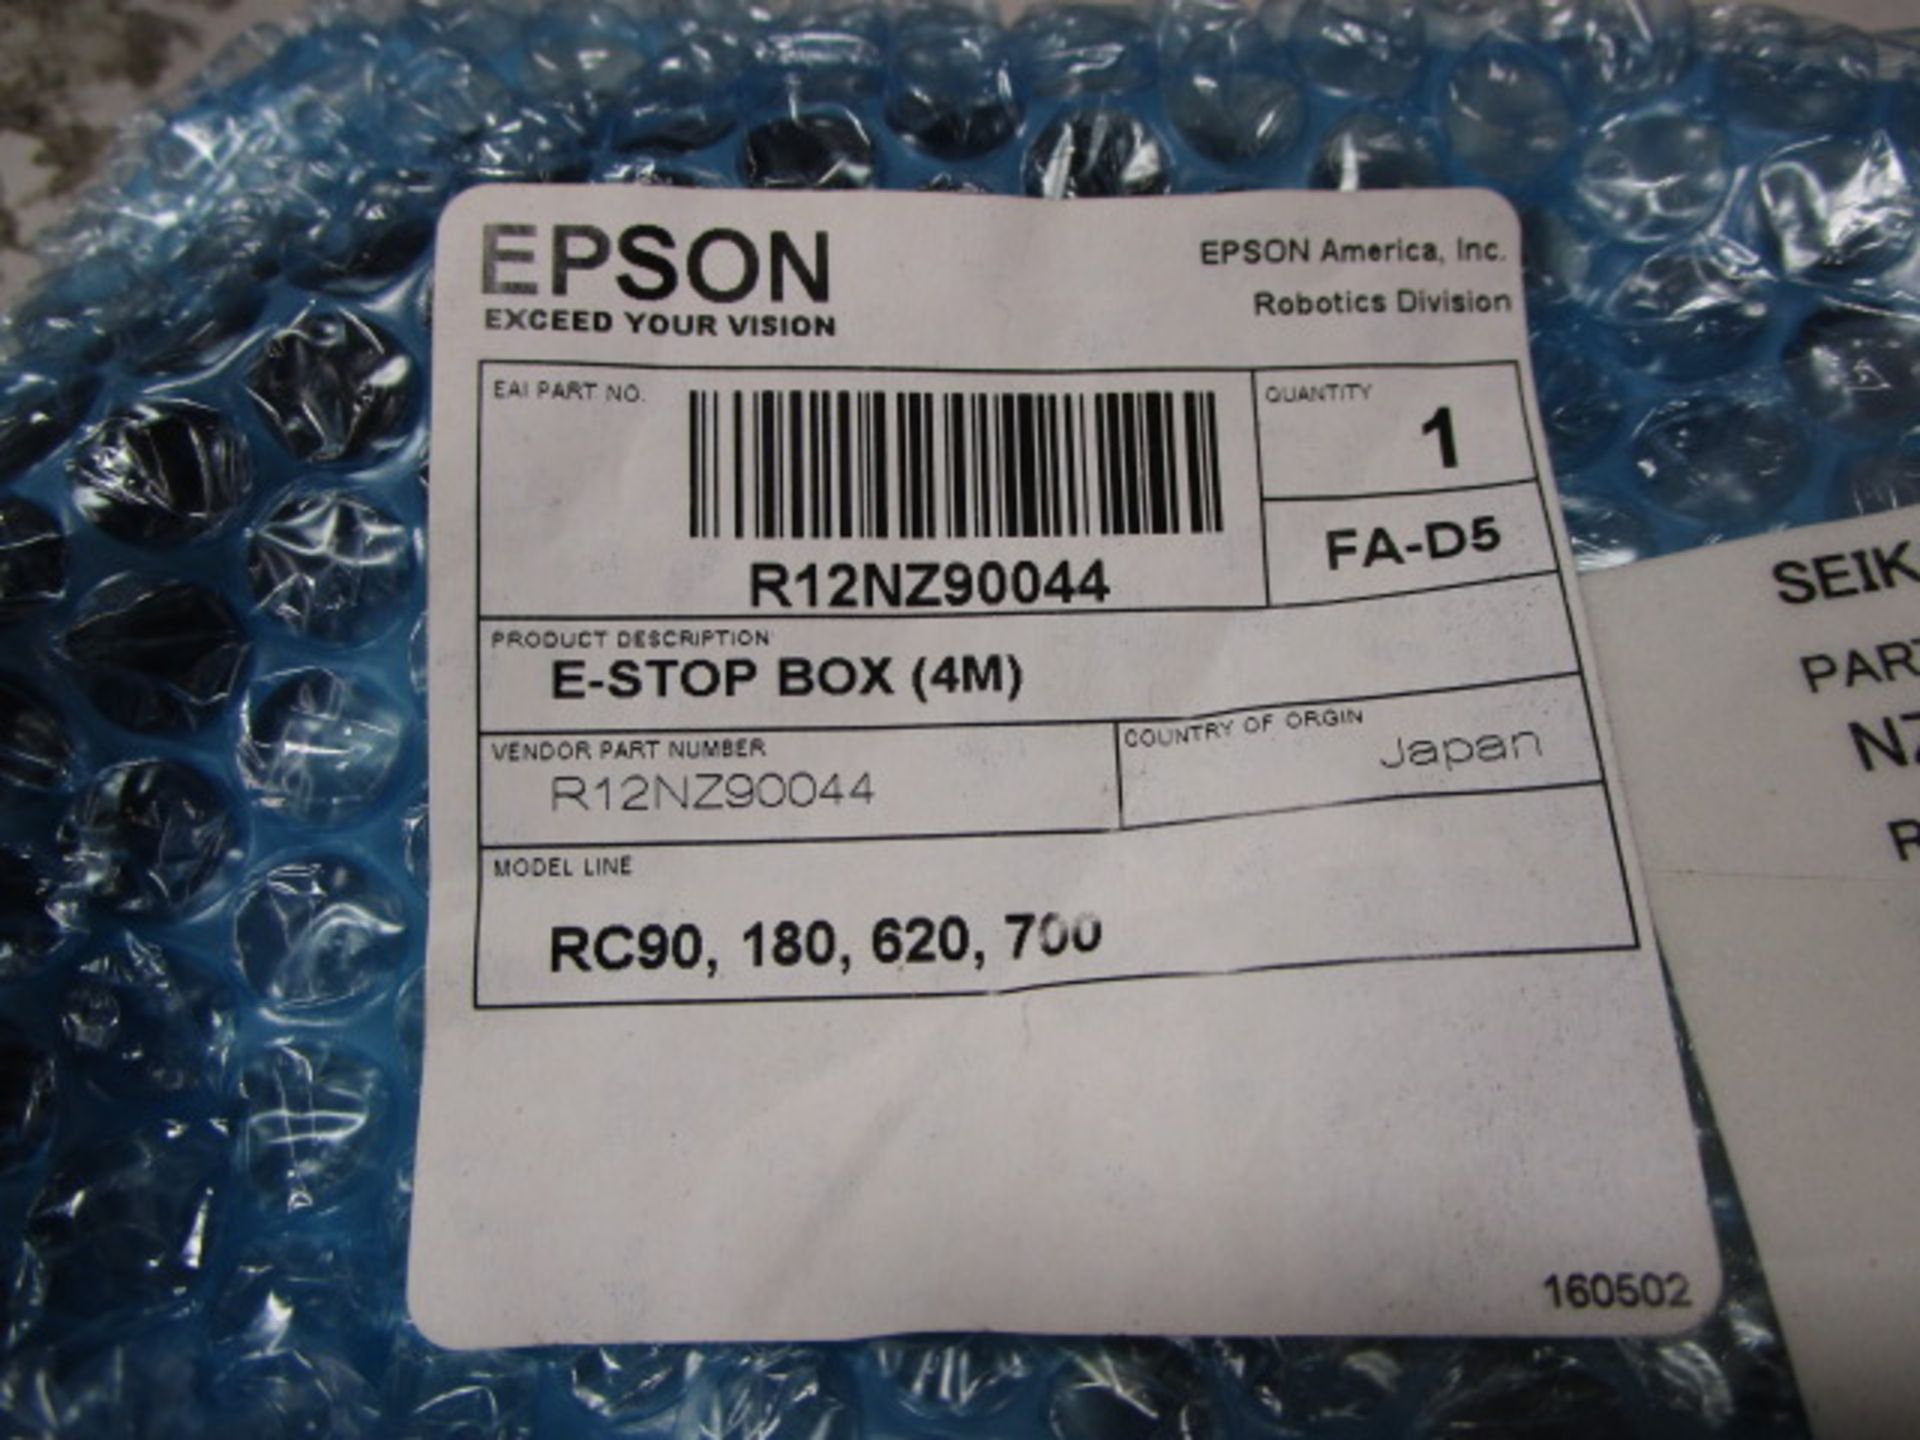 EPSON "BRAND NEW IN THE BOX" INDUSTRIAL ROBOT MODEL NO. R11N1019 WITH MANIPULATOR LS3-401S & - Image 10 of 13